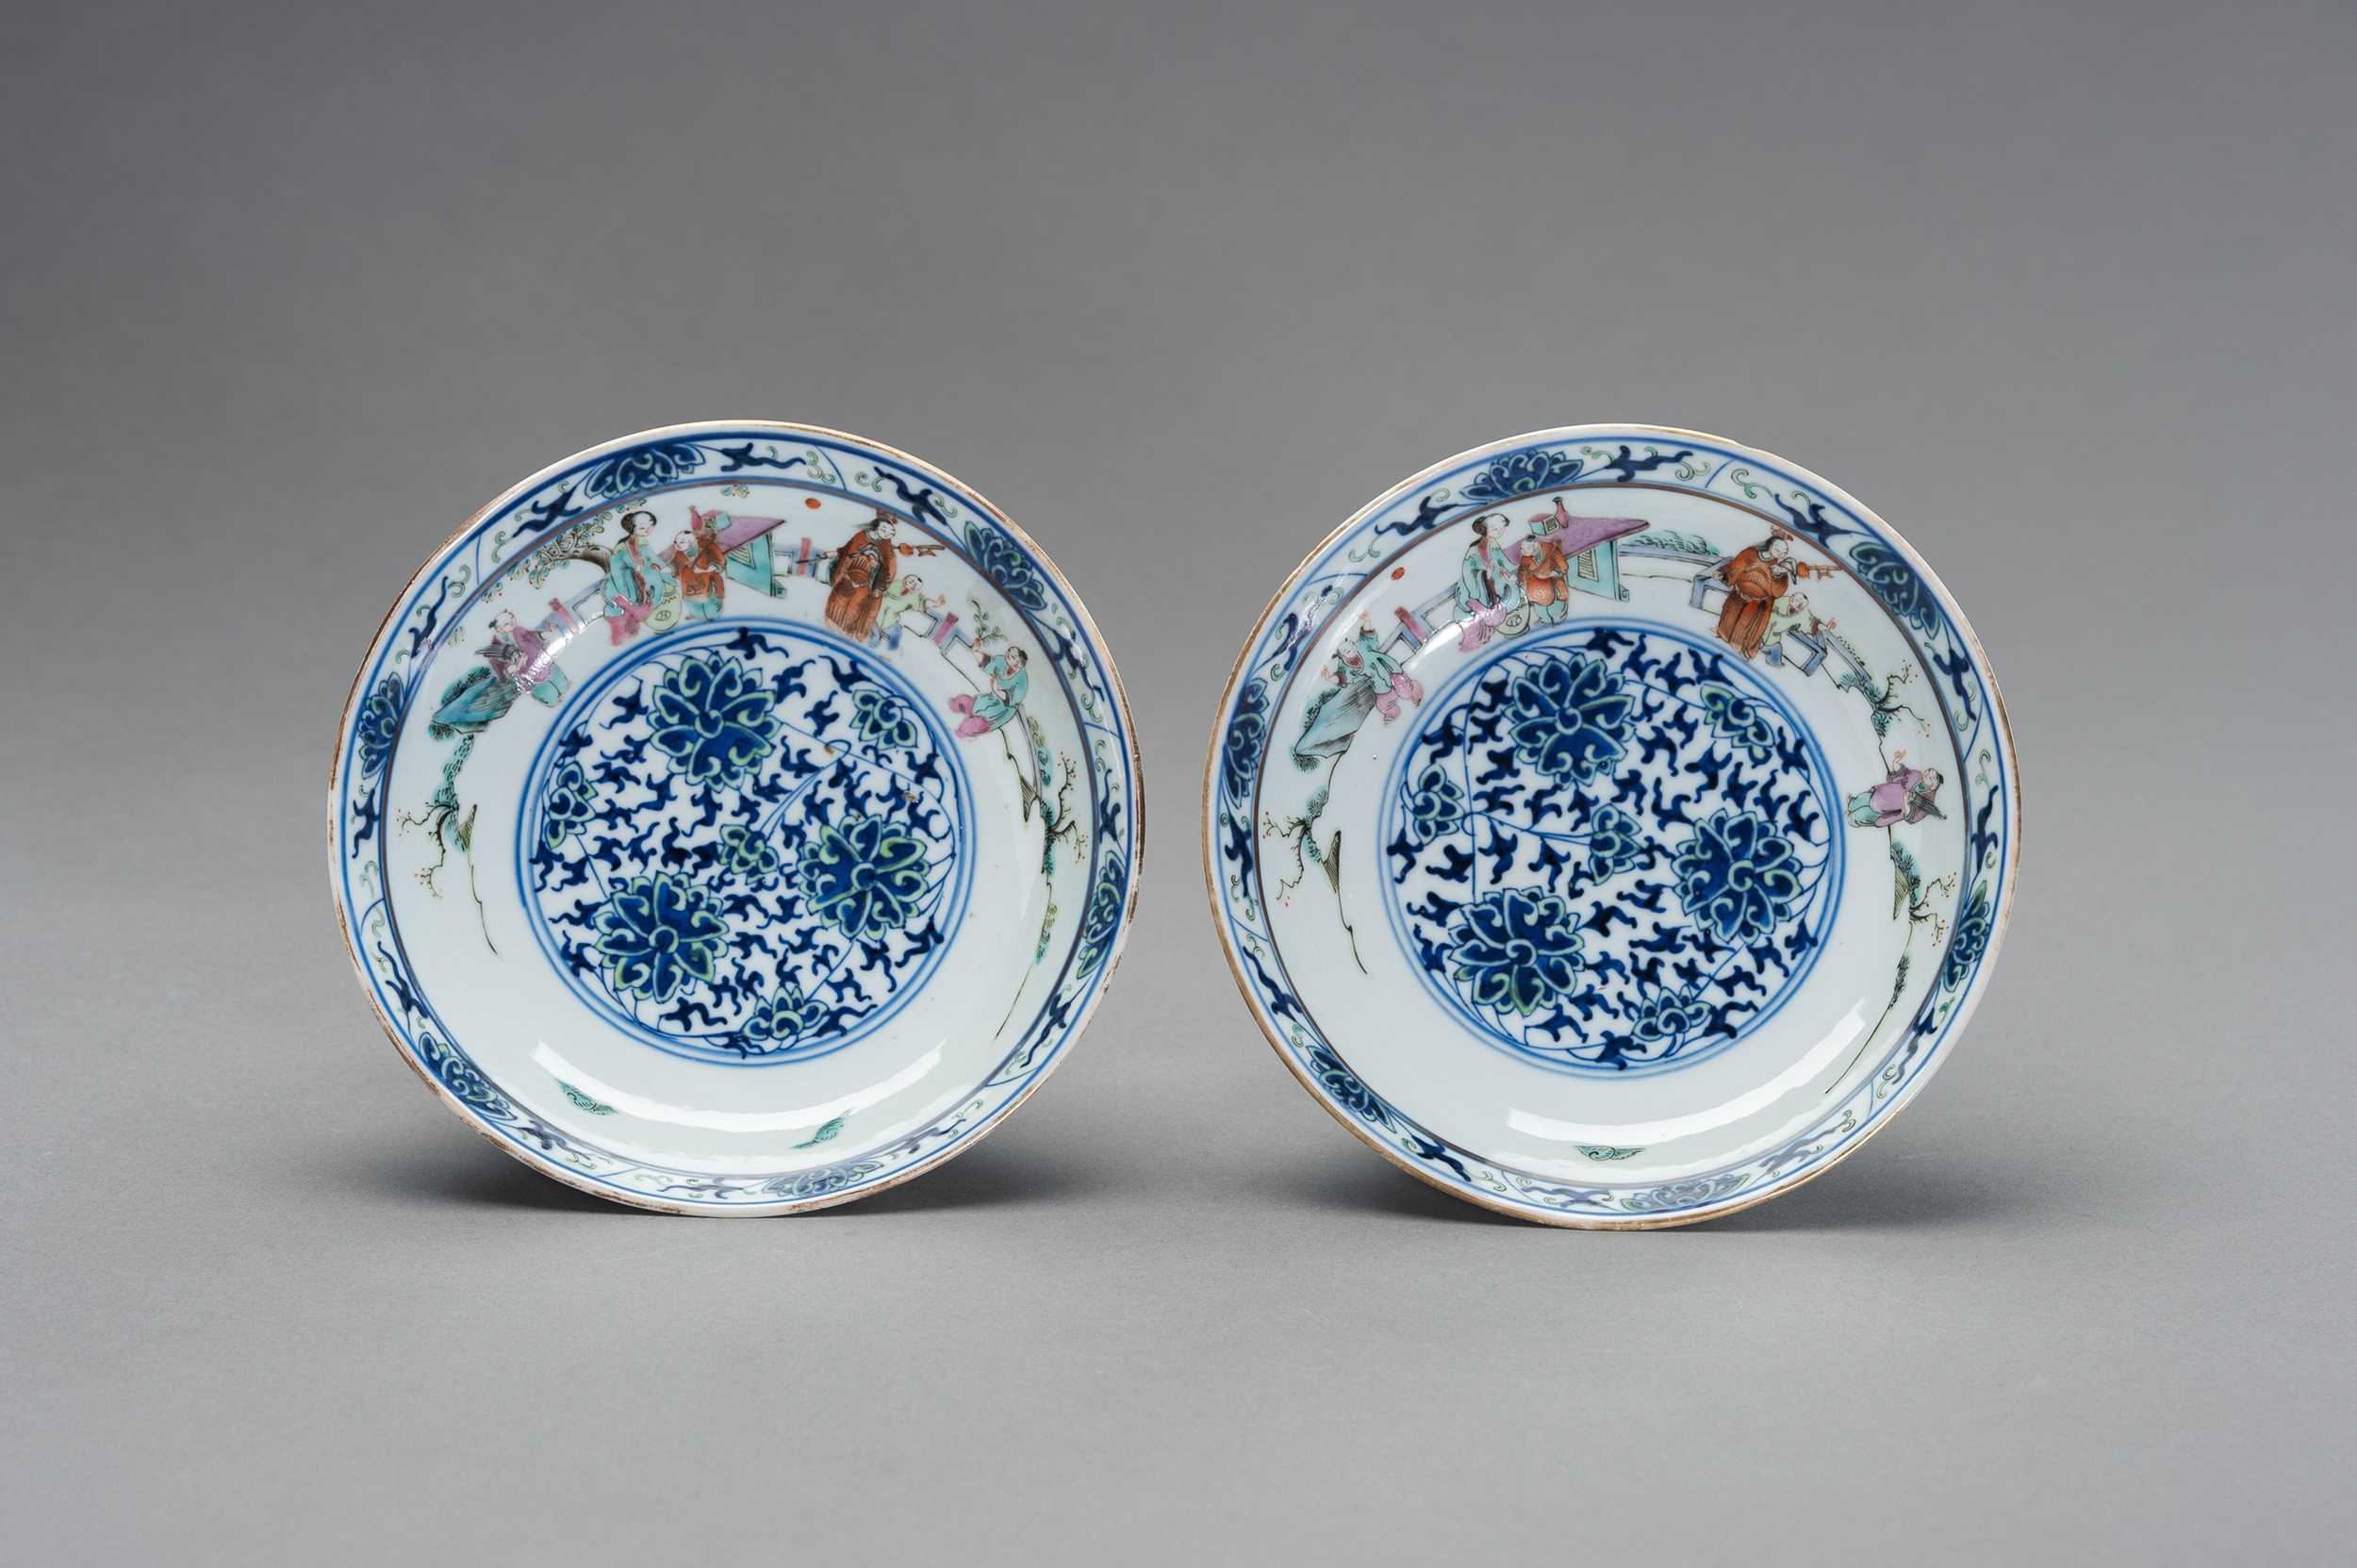 A PAIR OF DOCAI PORCELAIN DISHES